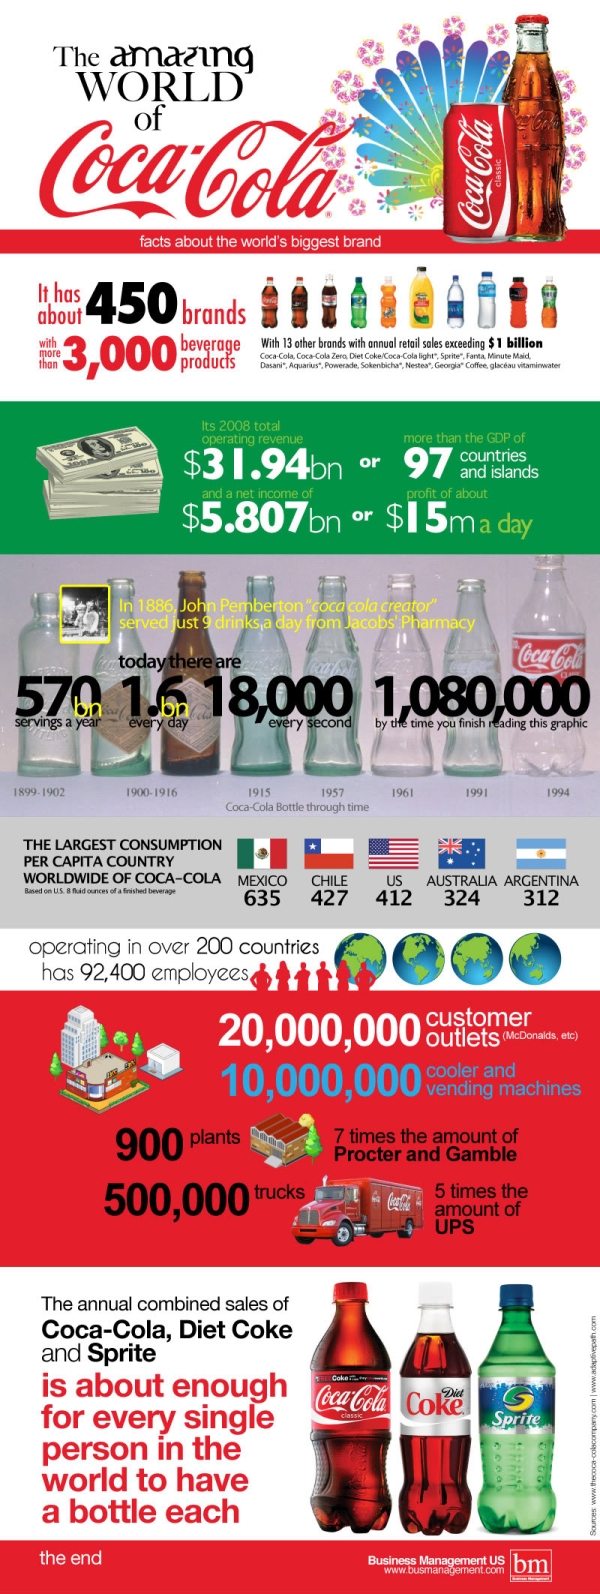 Coca Cola Facts  How Coca-Cola Runs the World and Facts